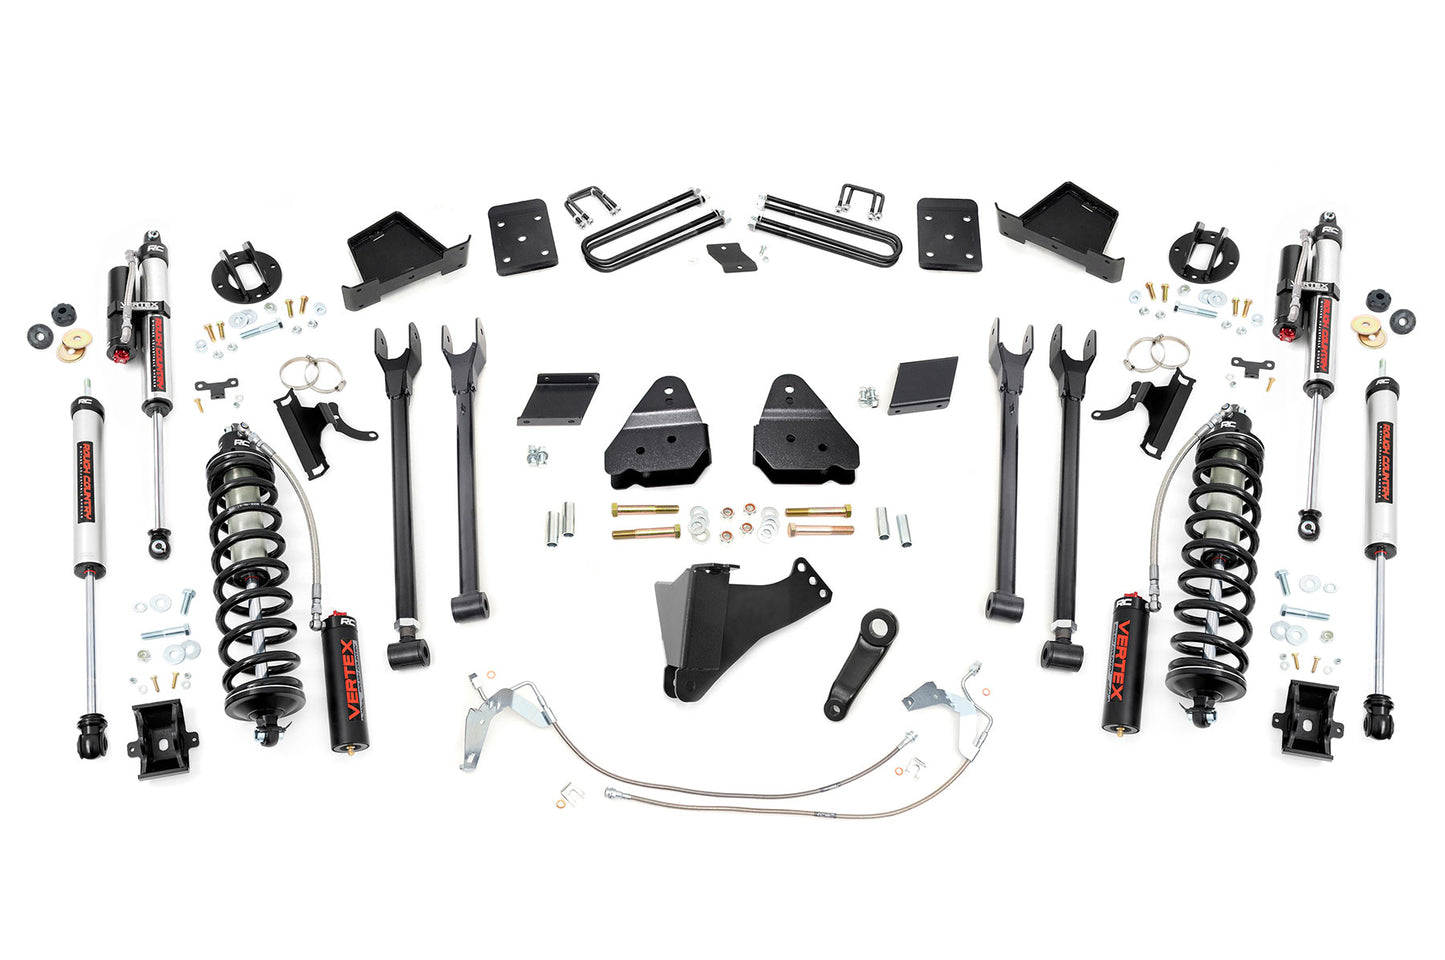 Rough Country (52759) 6 Inch Lift Kit  | 4-Link  |  No OVLD  |  C/O Vertex | Ford F-250 Super Duty (15-16)